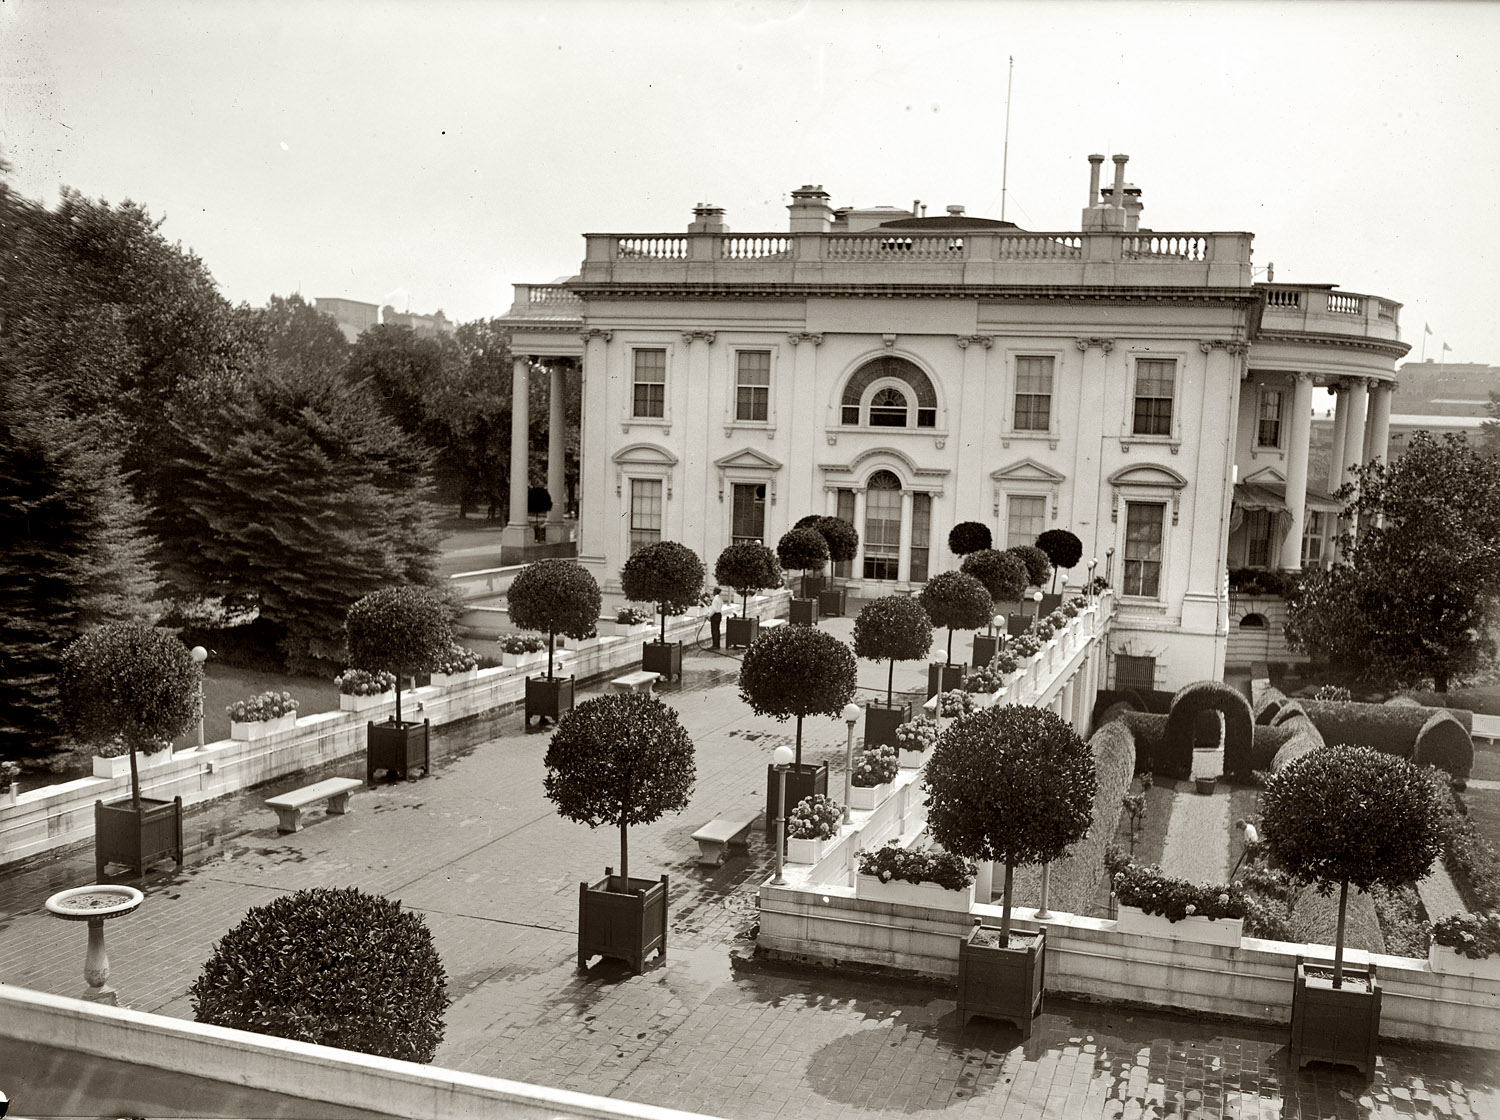 1923. White House West Wing. "West promenade terrace atop colonnade betwen Residence and Executive Offices." View full size. National Photo Company.